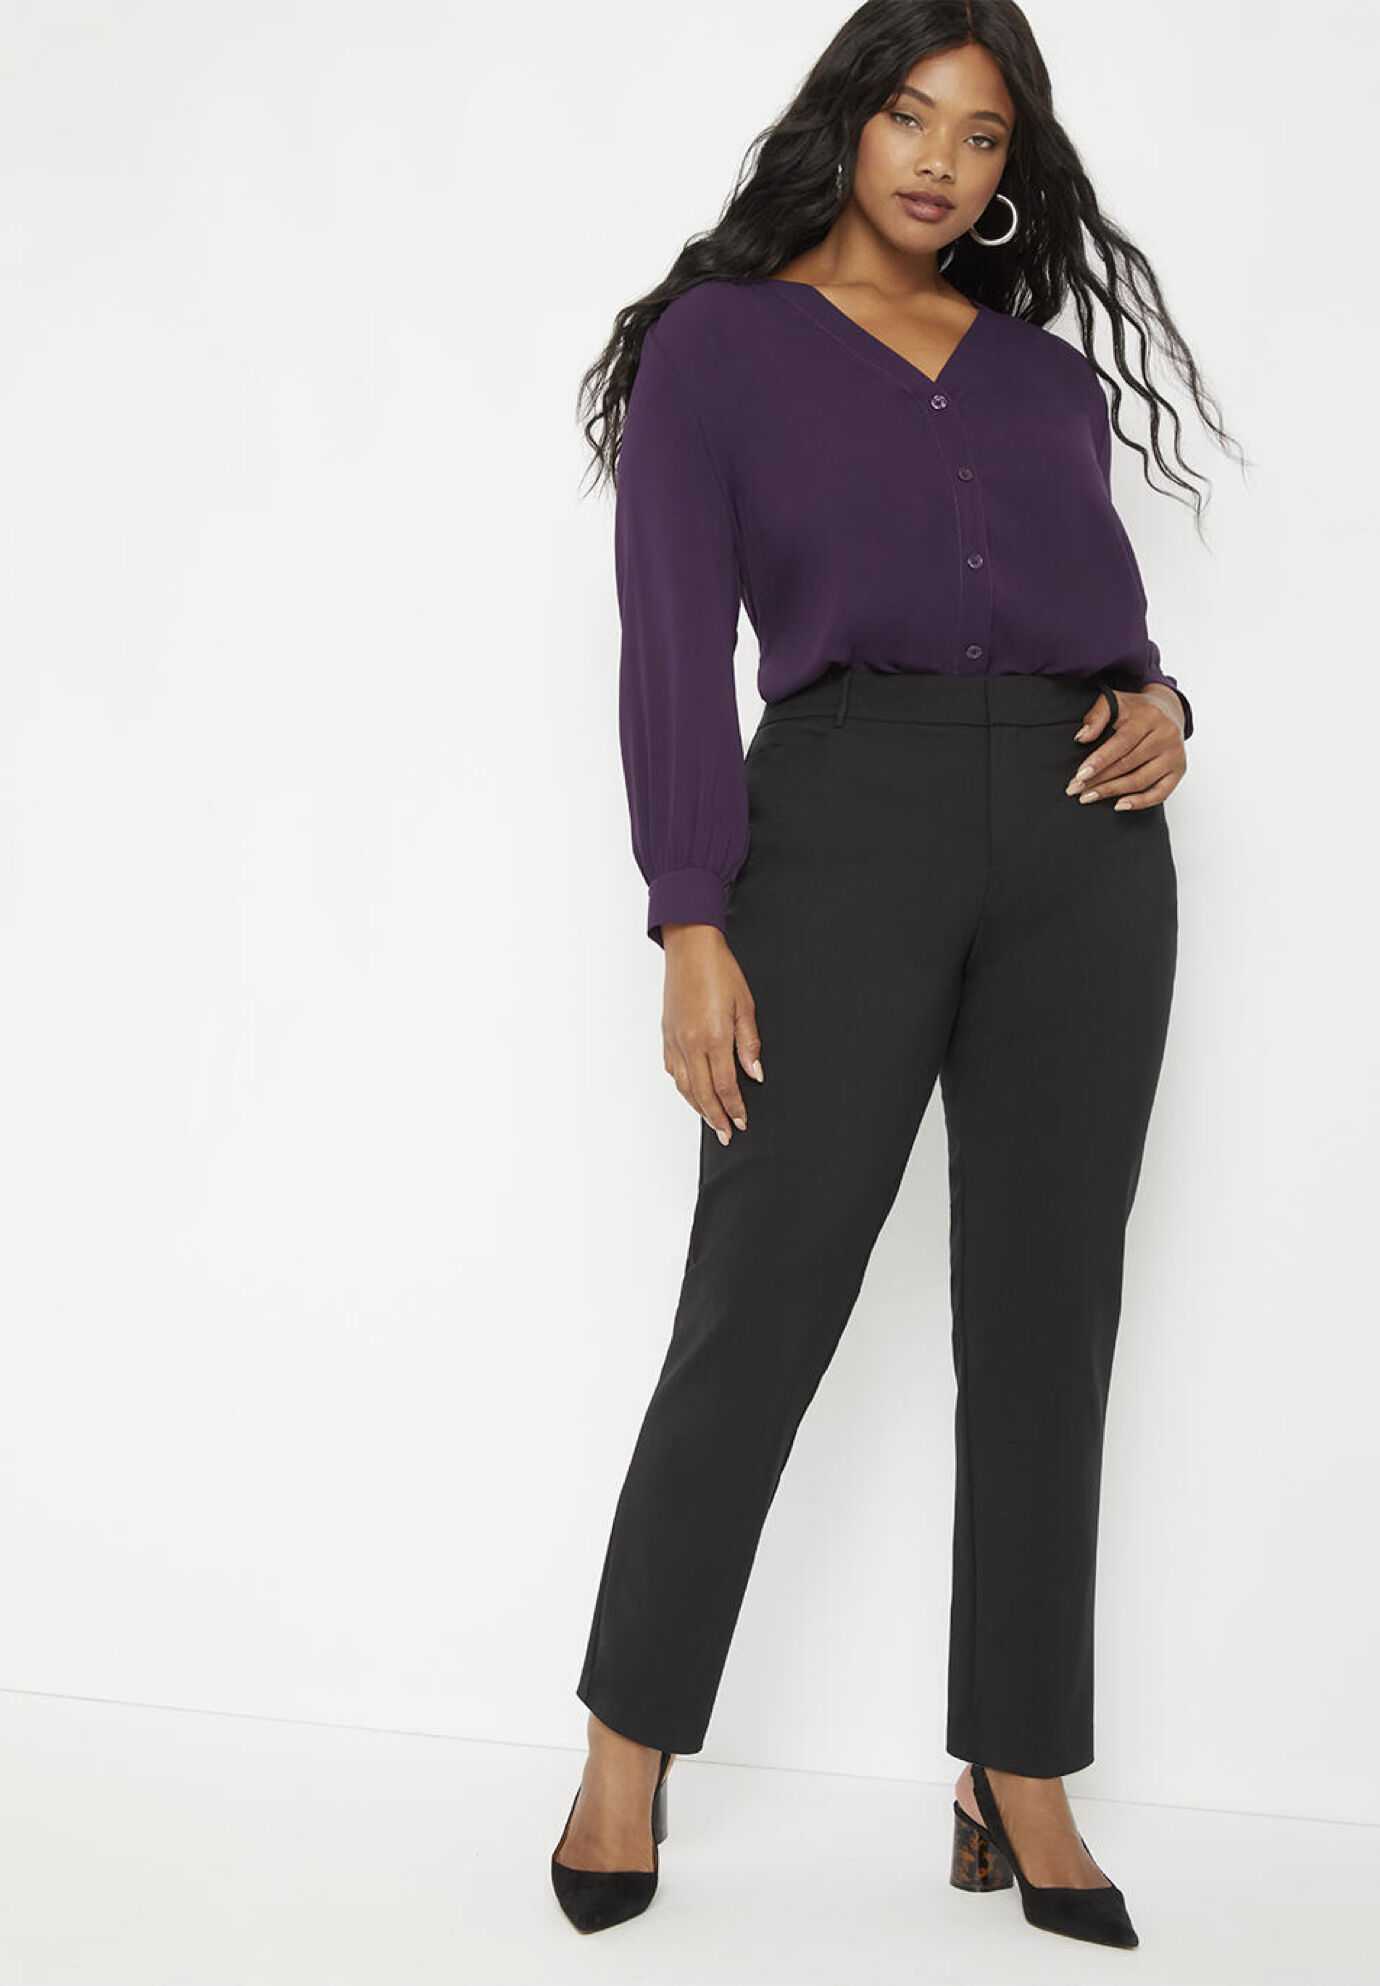 Eloquii Kady Fit Double-Weave Pant